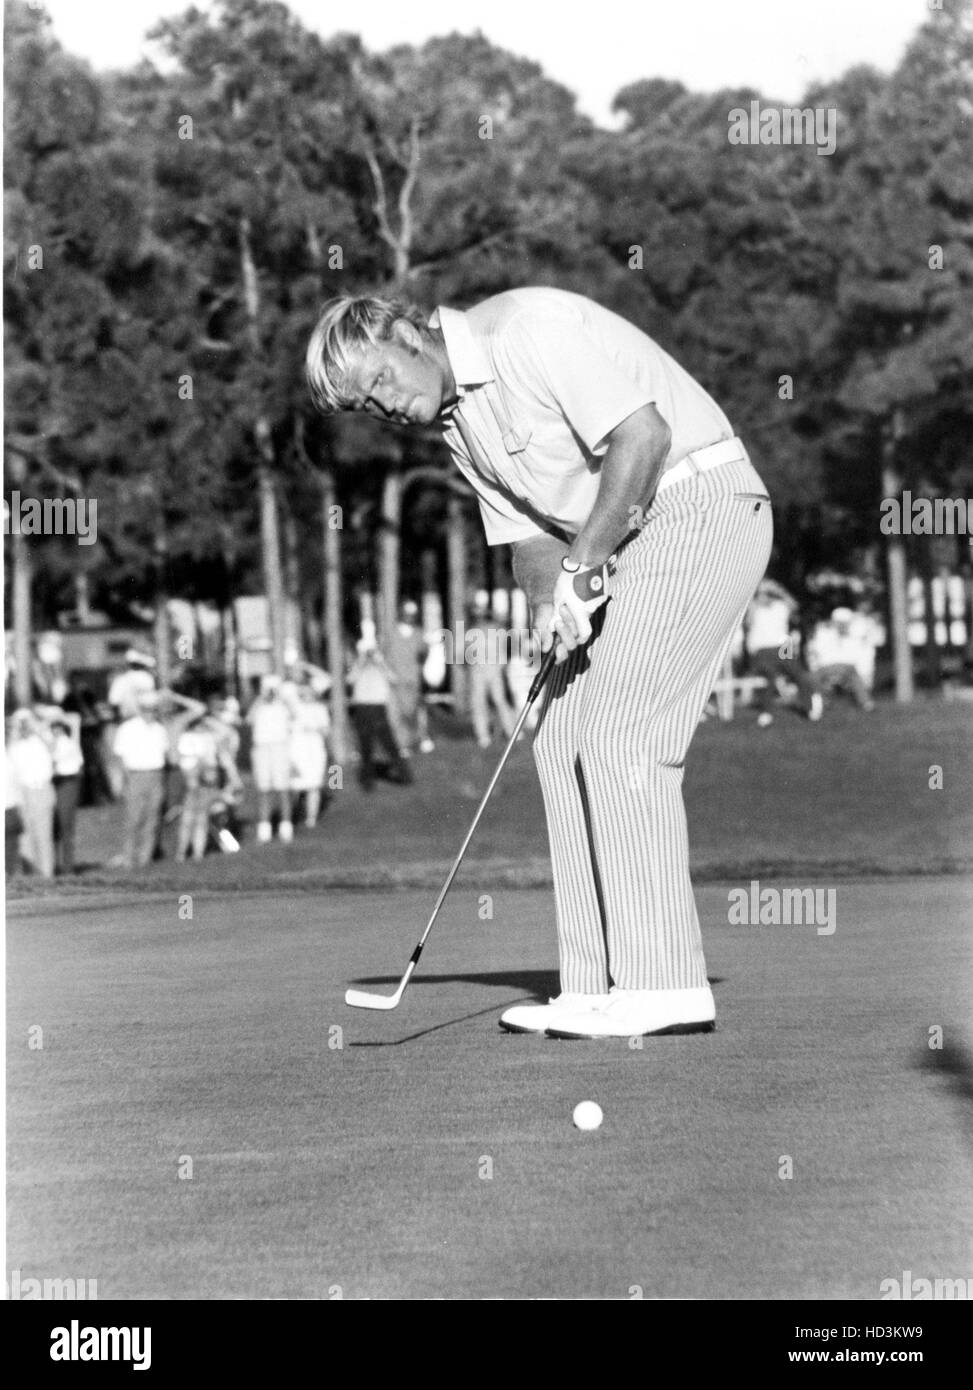 BING CROSBY NATIONAL PRO-AM TOURNAMENT, Jack Nicklaus, aired January 27 ...